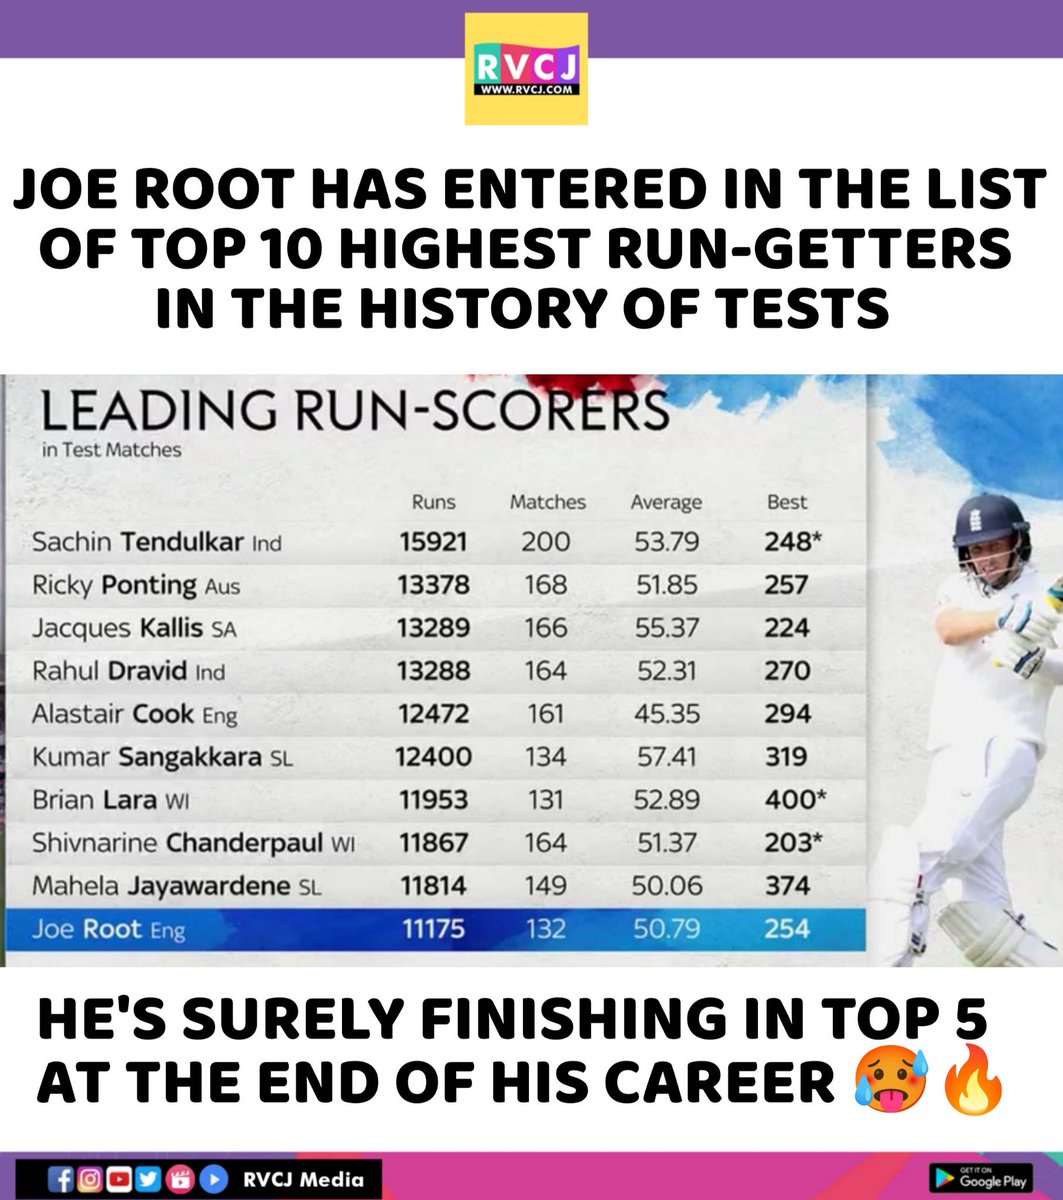 Top 10 Highest Run-Getters
#Ashes #ENGvsAUS #Ashes2023